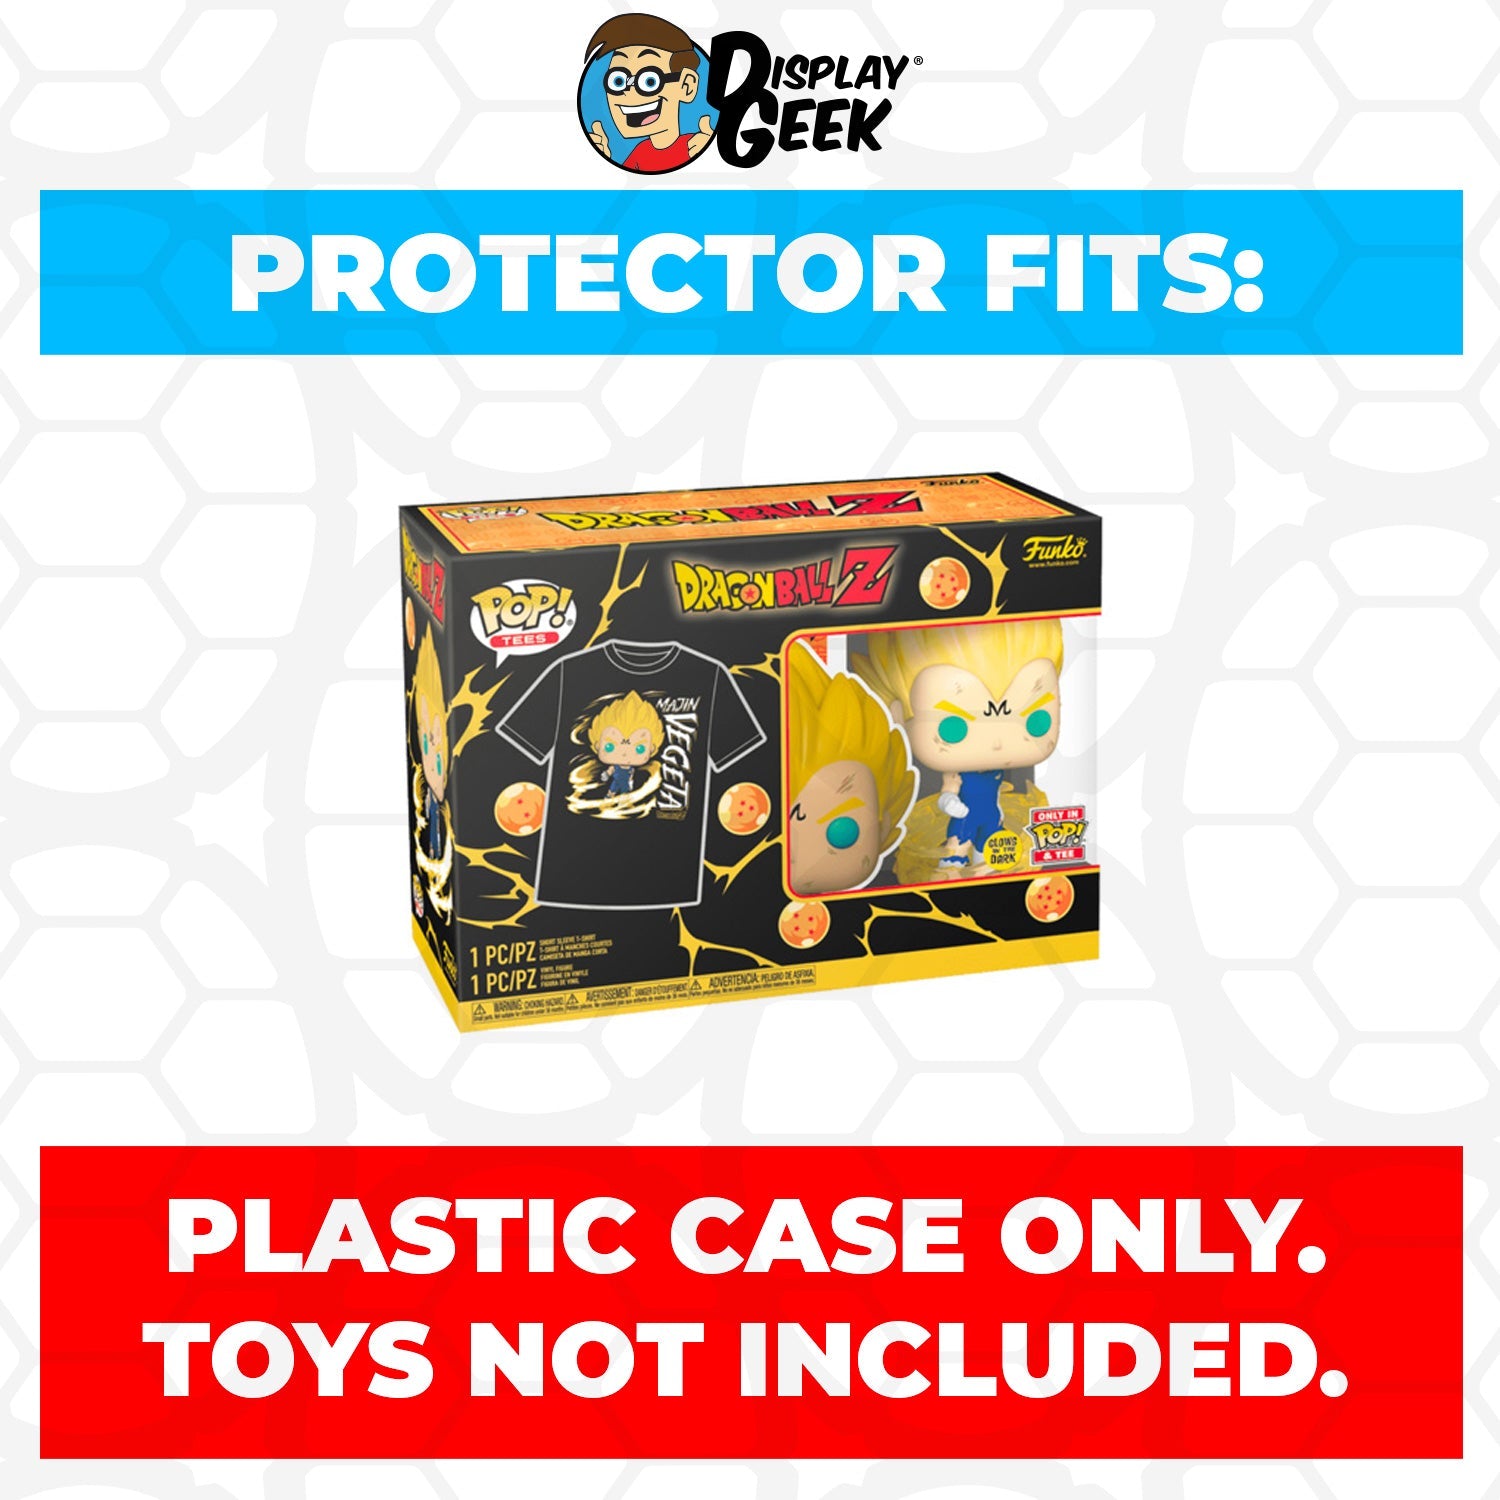 Pop Protector for Pop & Tee Majin Vegeta Glow #862 Funko Box - PPG Pop Protector Guide Search Created by Display Geek